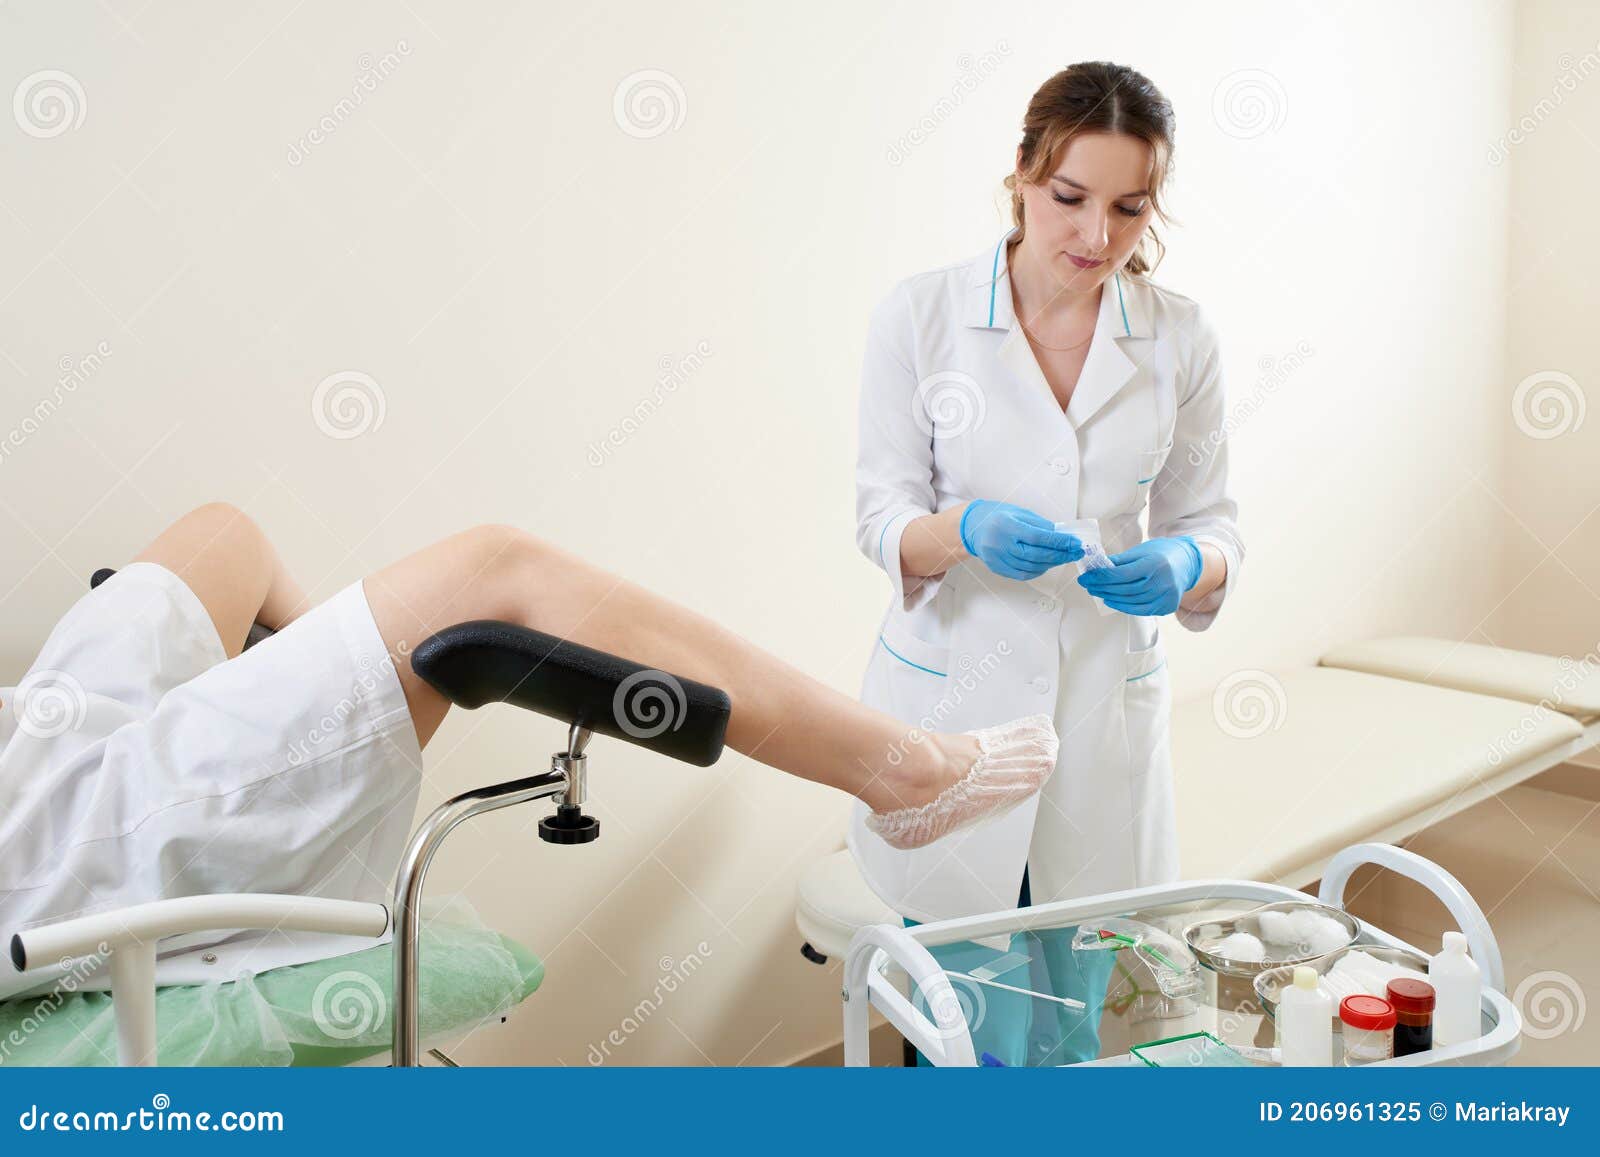 Gynaecologist Examining A Patient Sitting On Gynecological Chair Stock Image Image Of Medical